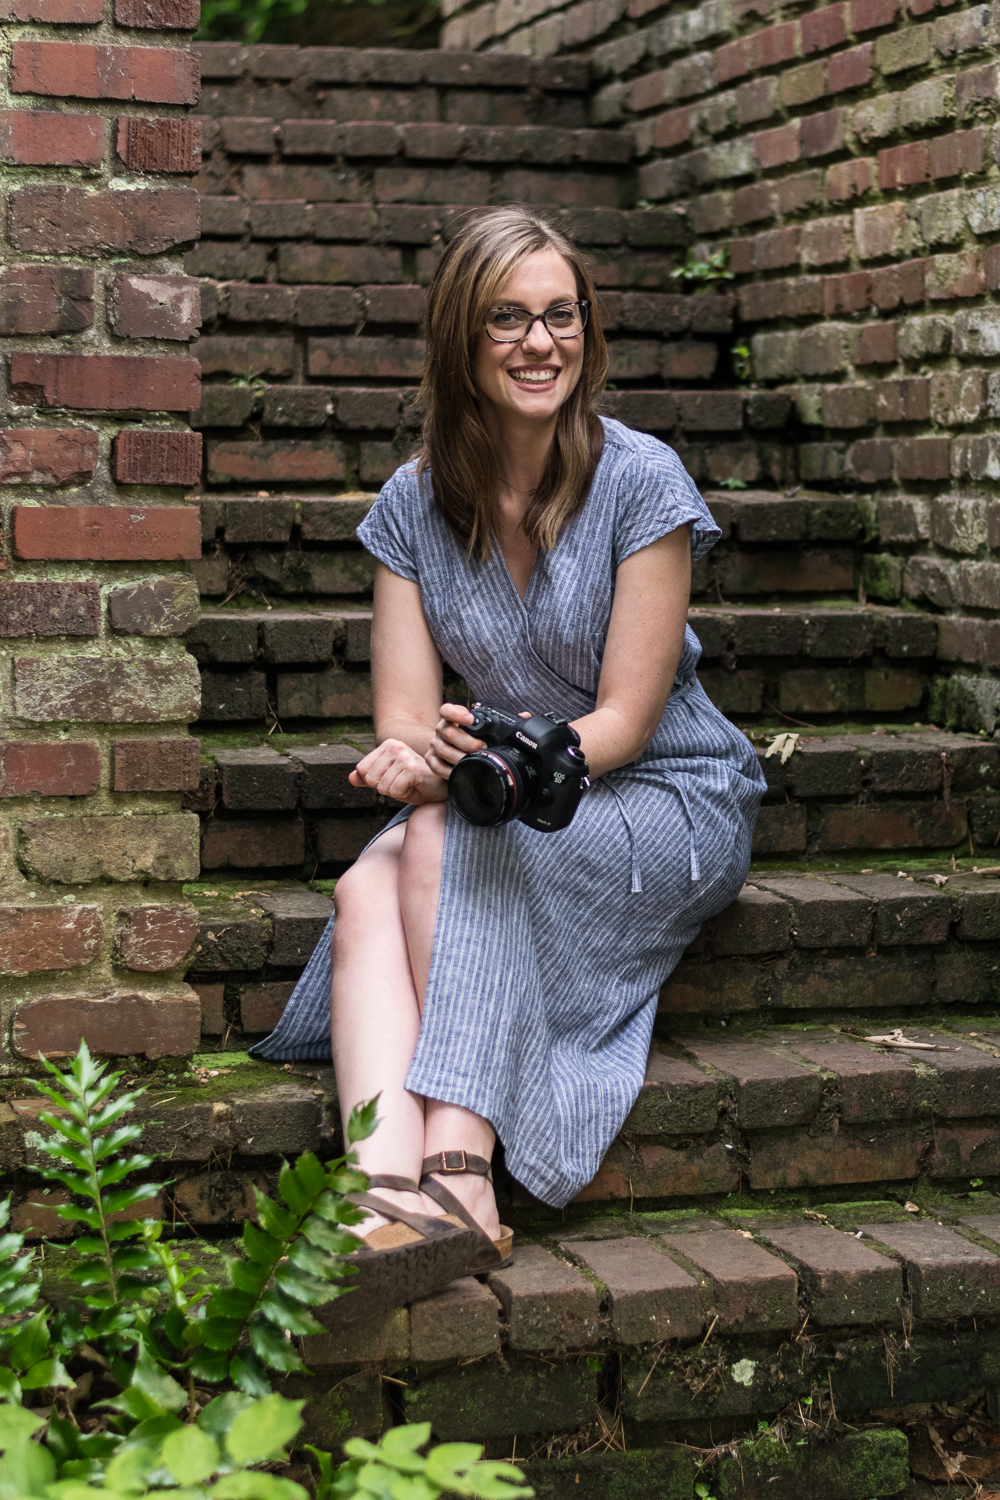 Knoxville photographer Krista Weatherholt sits on brick steps with her camera in hand.